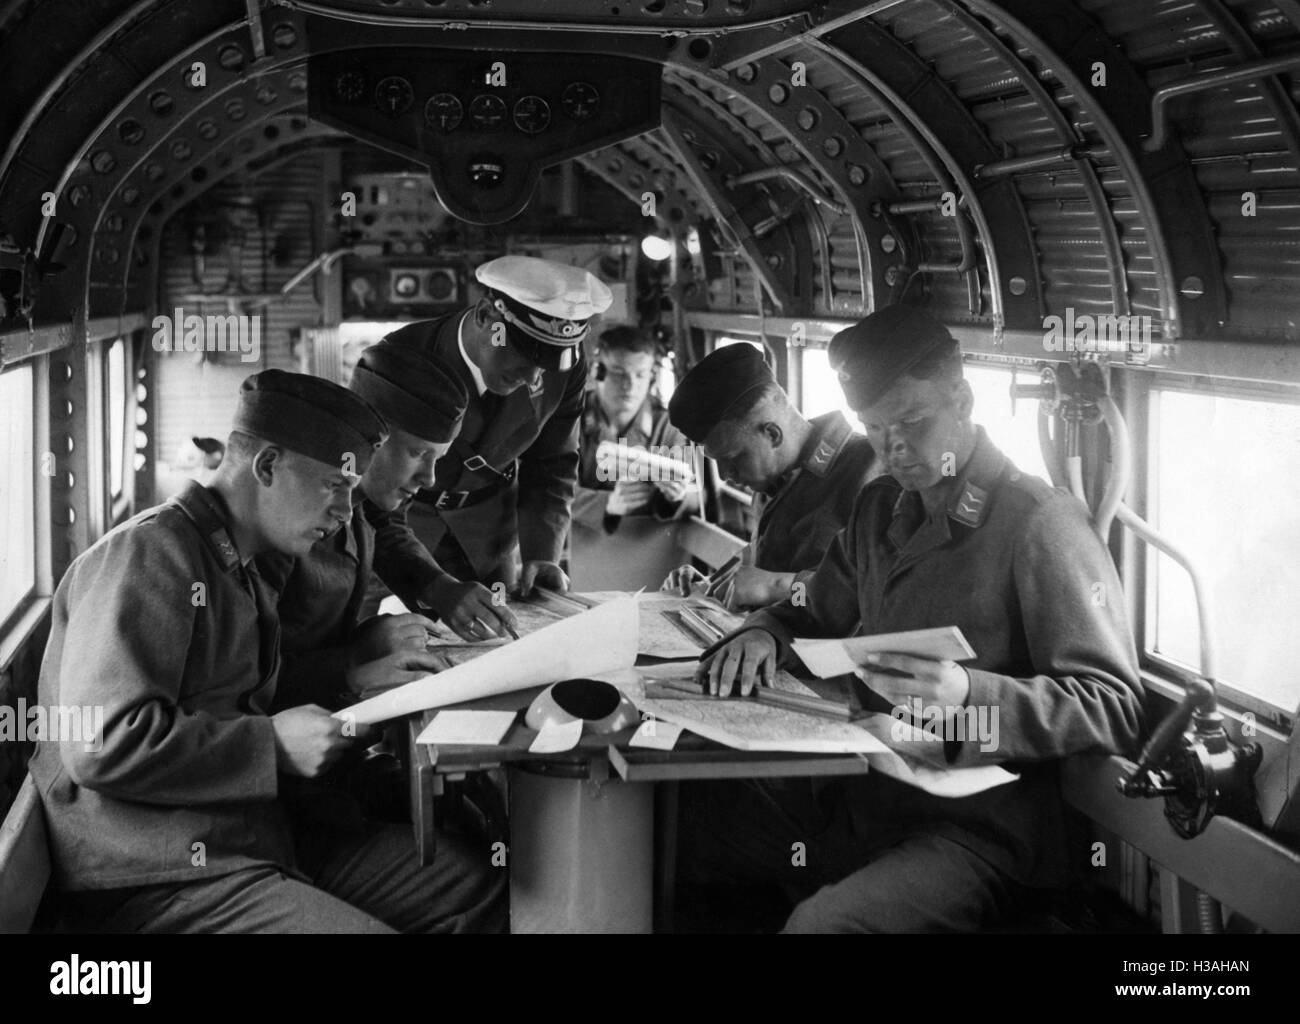 Navigation lessons at the Luftwaffe Stock Photo